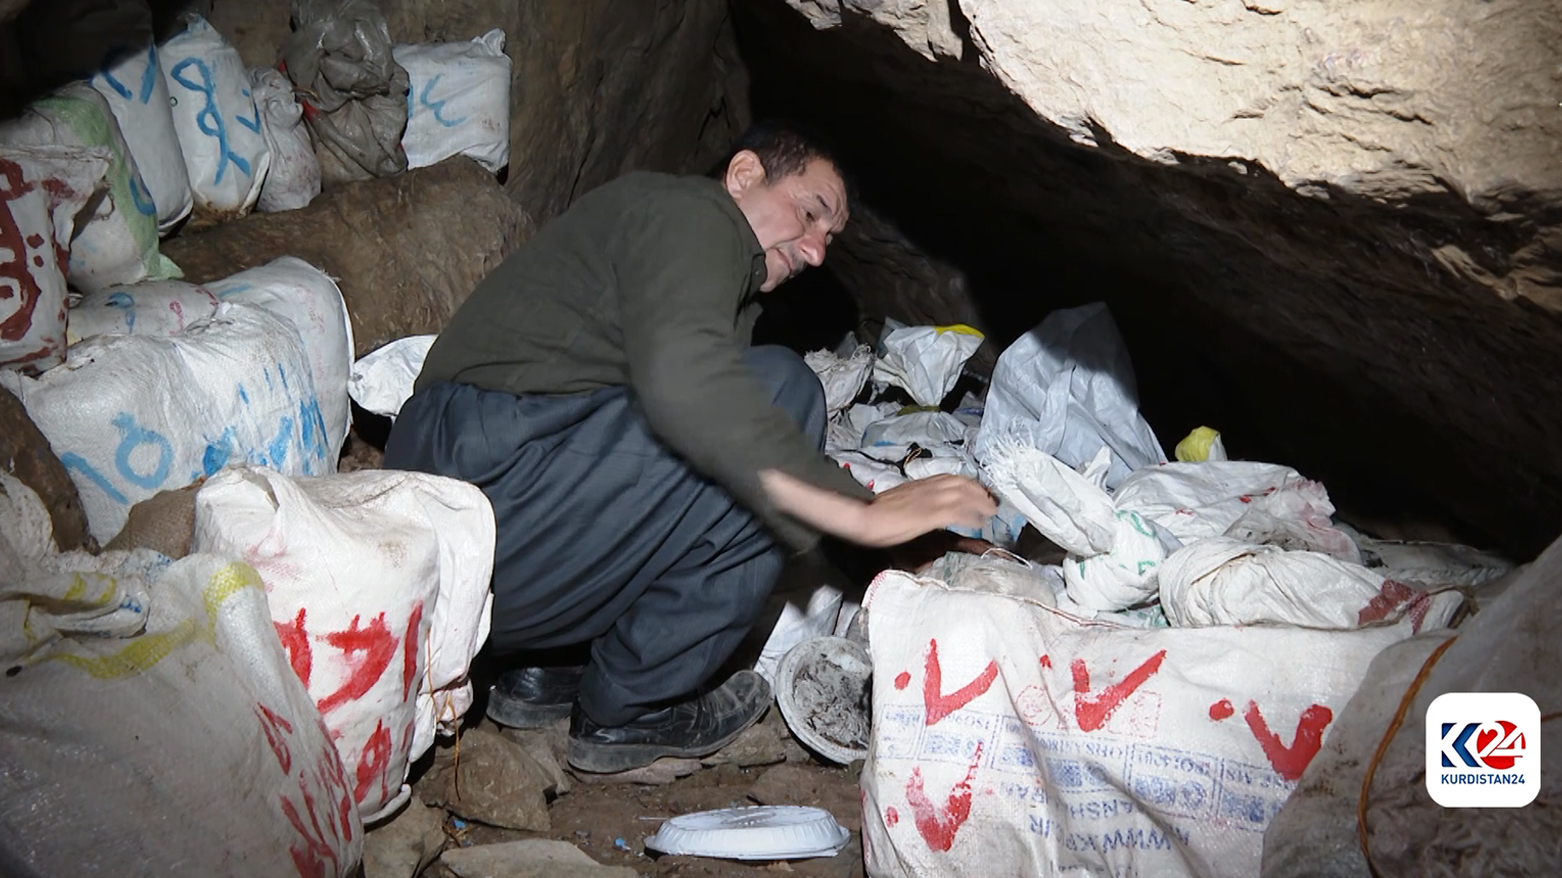 A kunapeest visitor inspects his preserved batches. (Photo: Kurdistan 24)